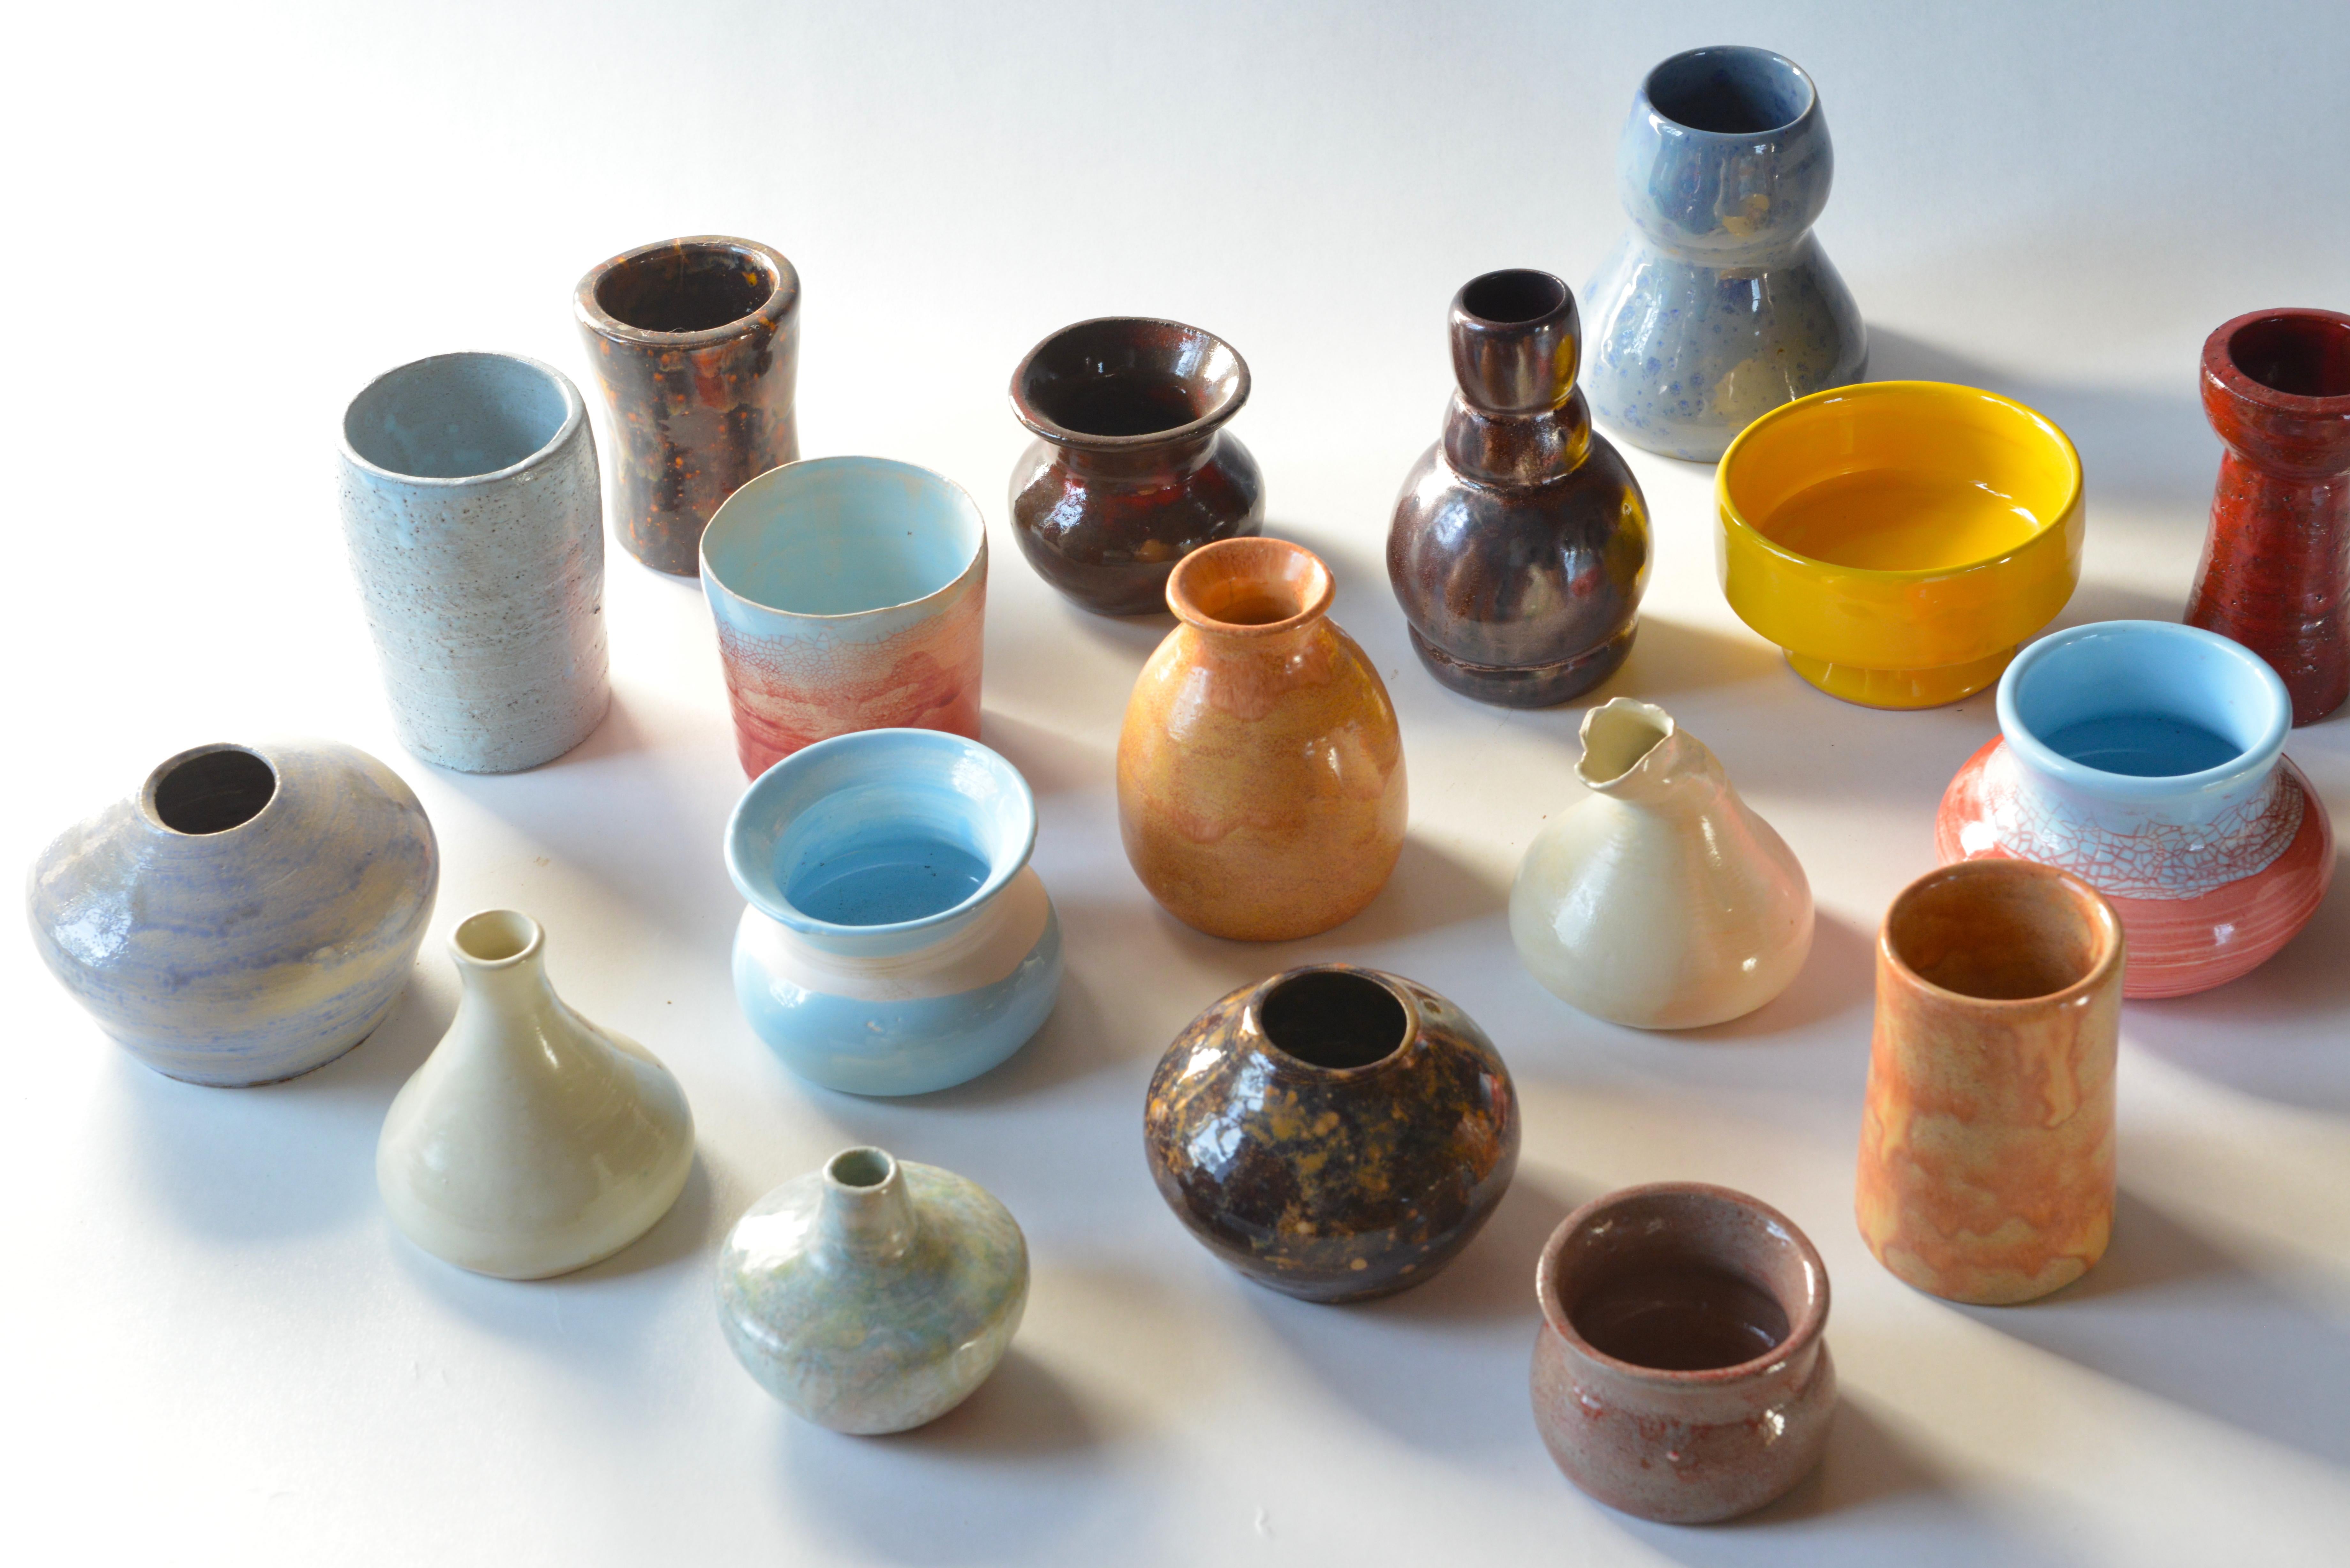 Tis lot of 19 miniature ceramic vintage vases / pots was made by a local artist in Bruges, Belgium 20 years ago. Pale blues, apricot, warm white, deep red, sunny yellow, coral and browns all go very well together.